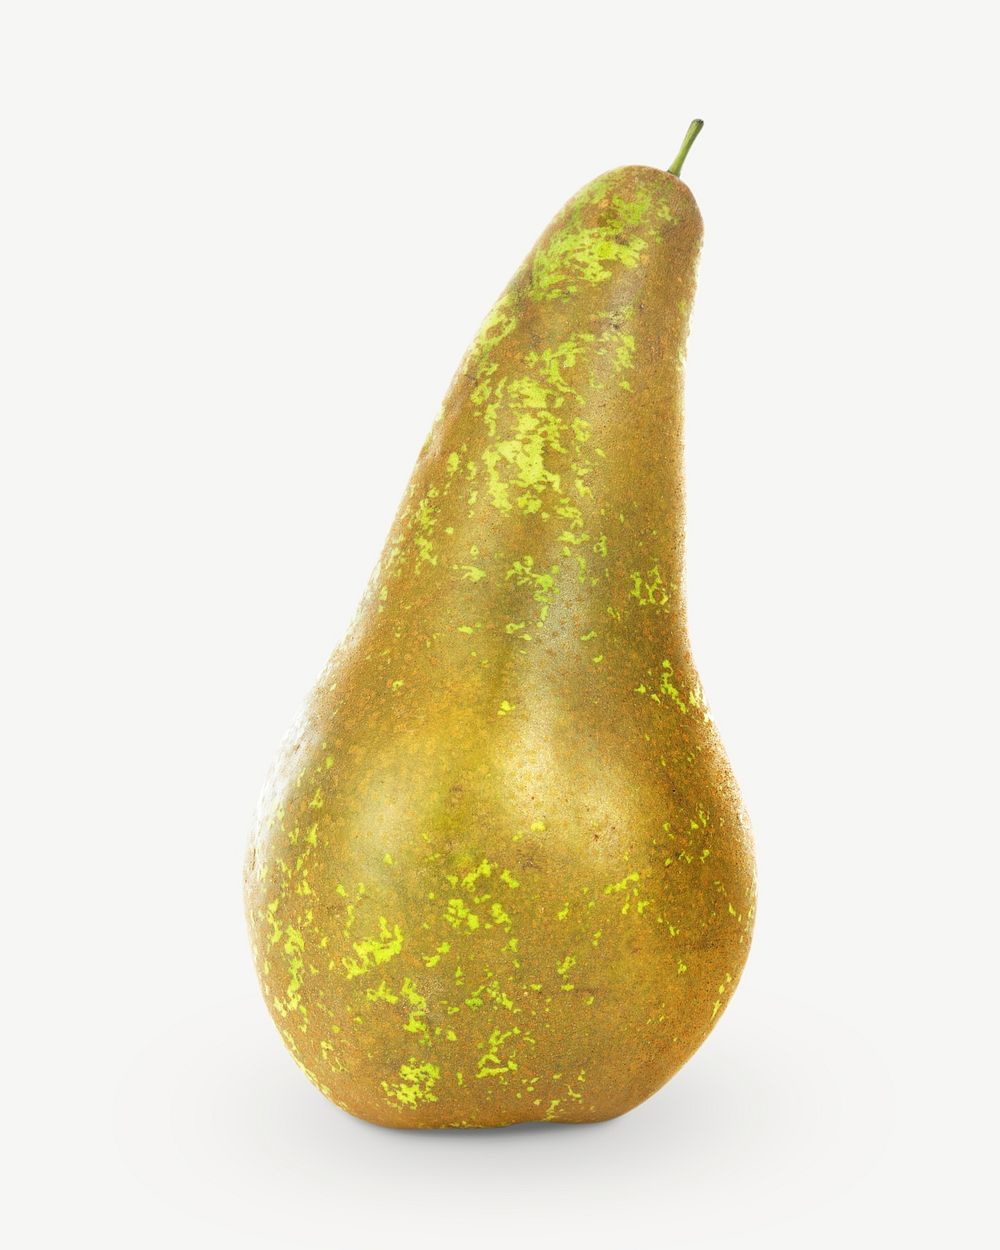 Pear image graphic psd